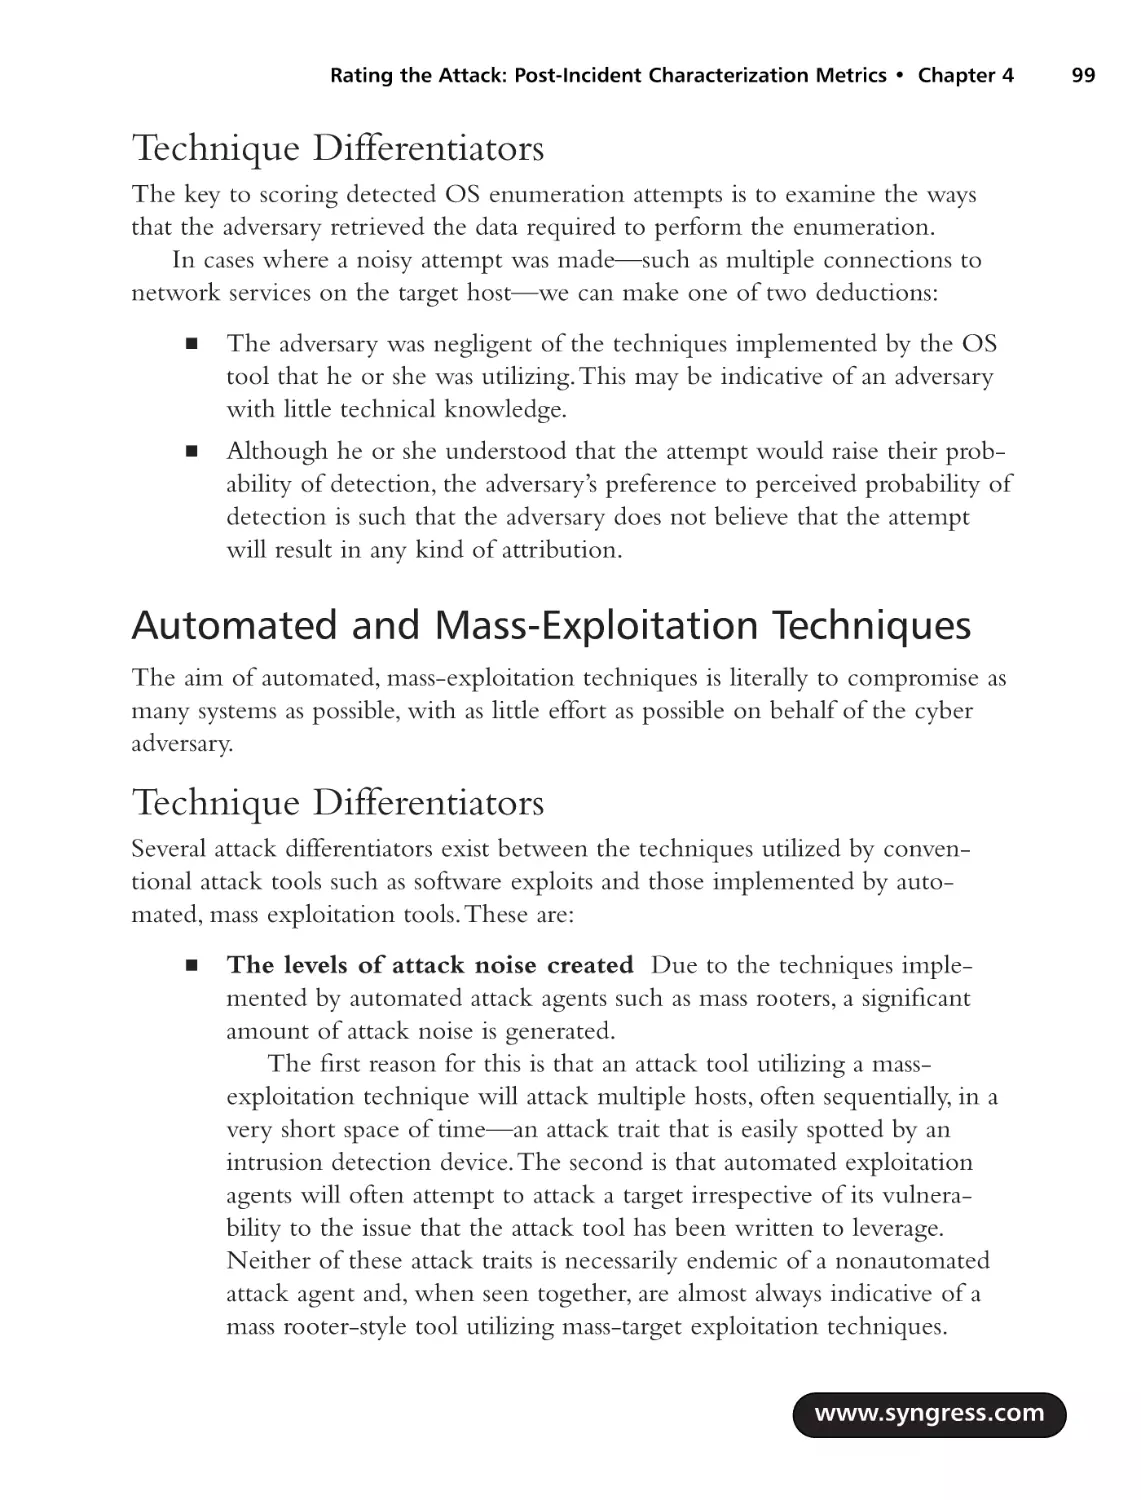 Technique Differentiators
Automated and Mass-Exploitation Techniques
Technique Differentiators